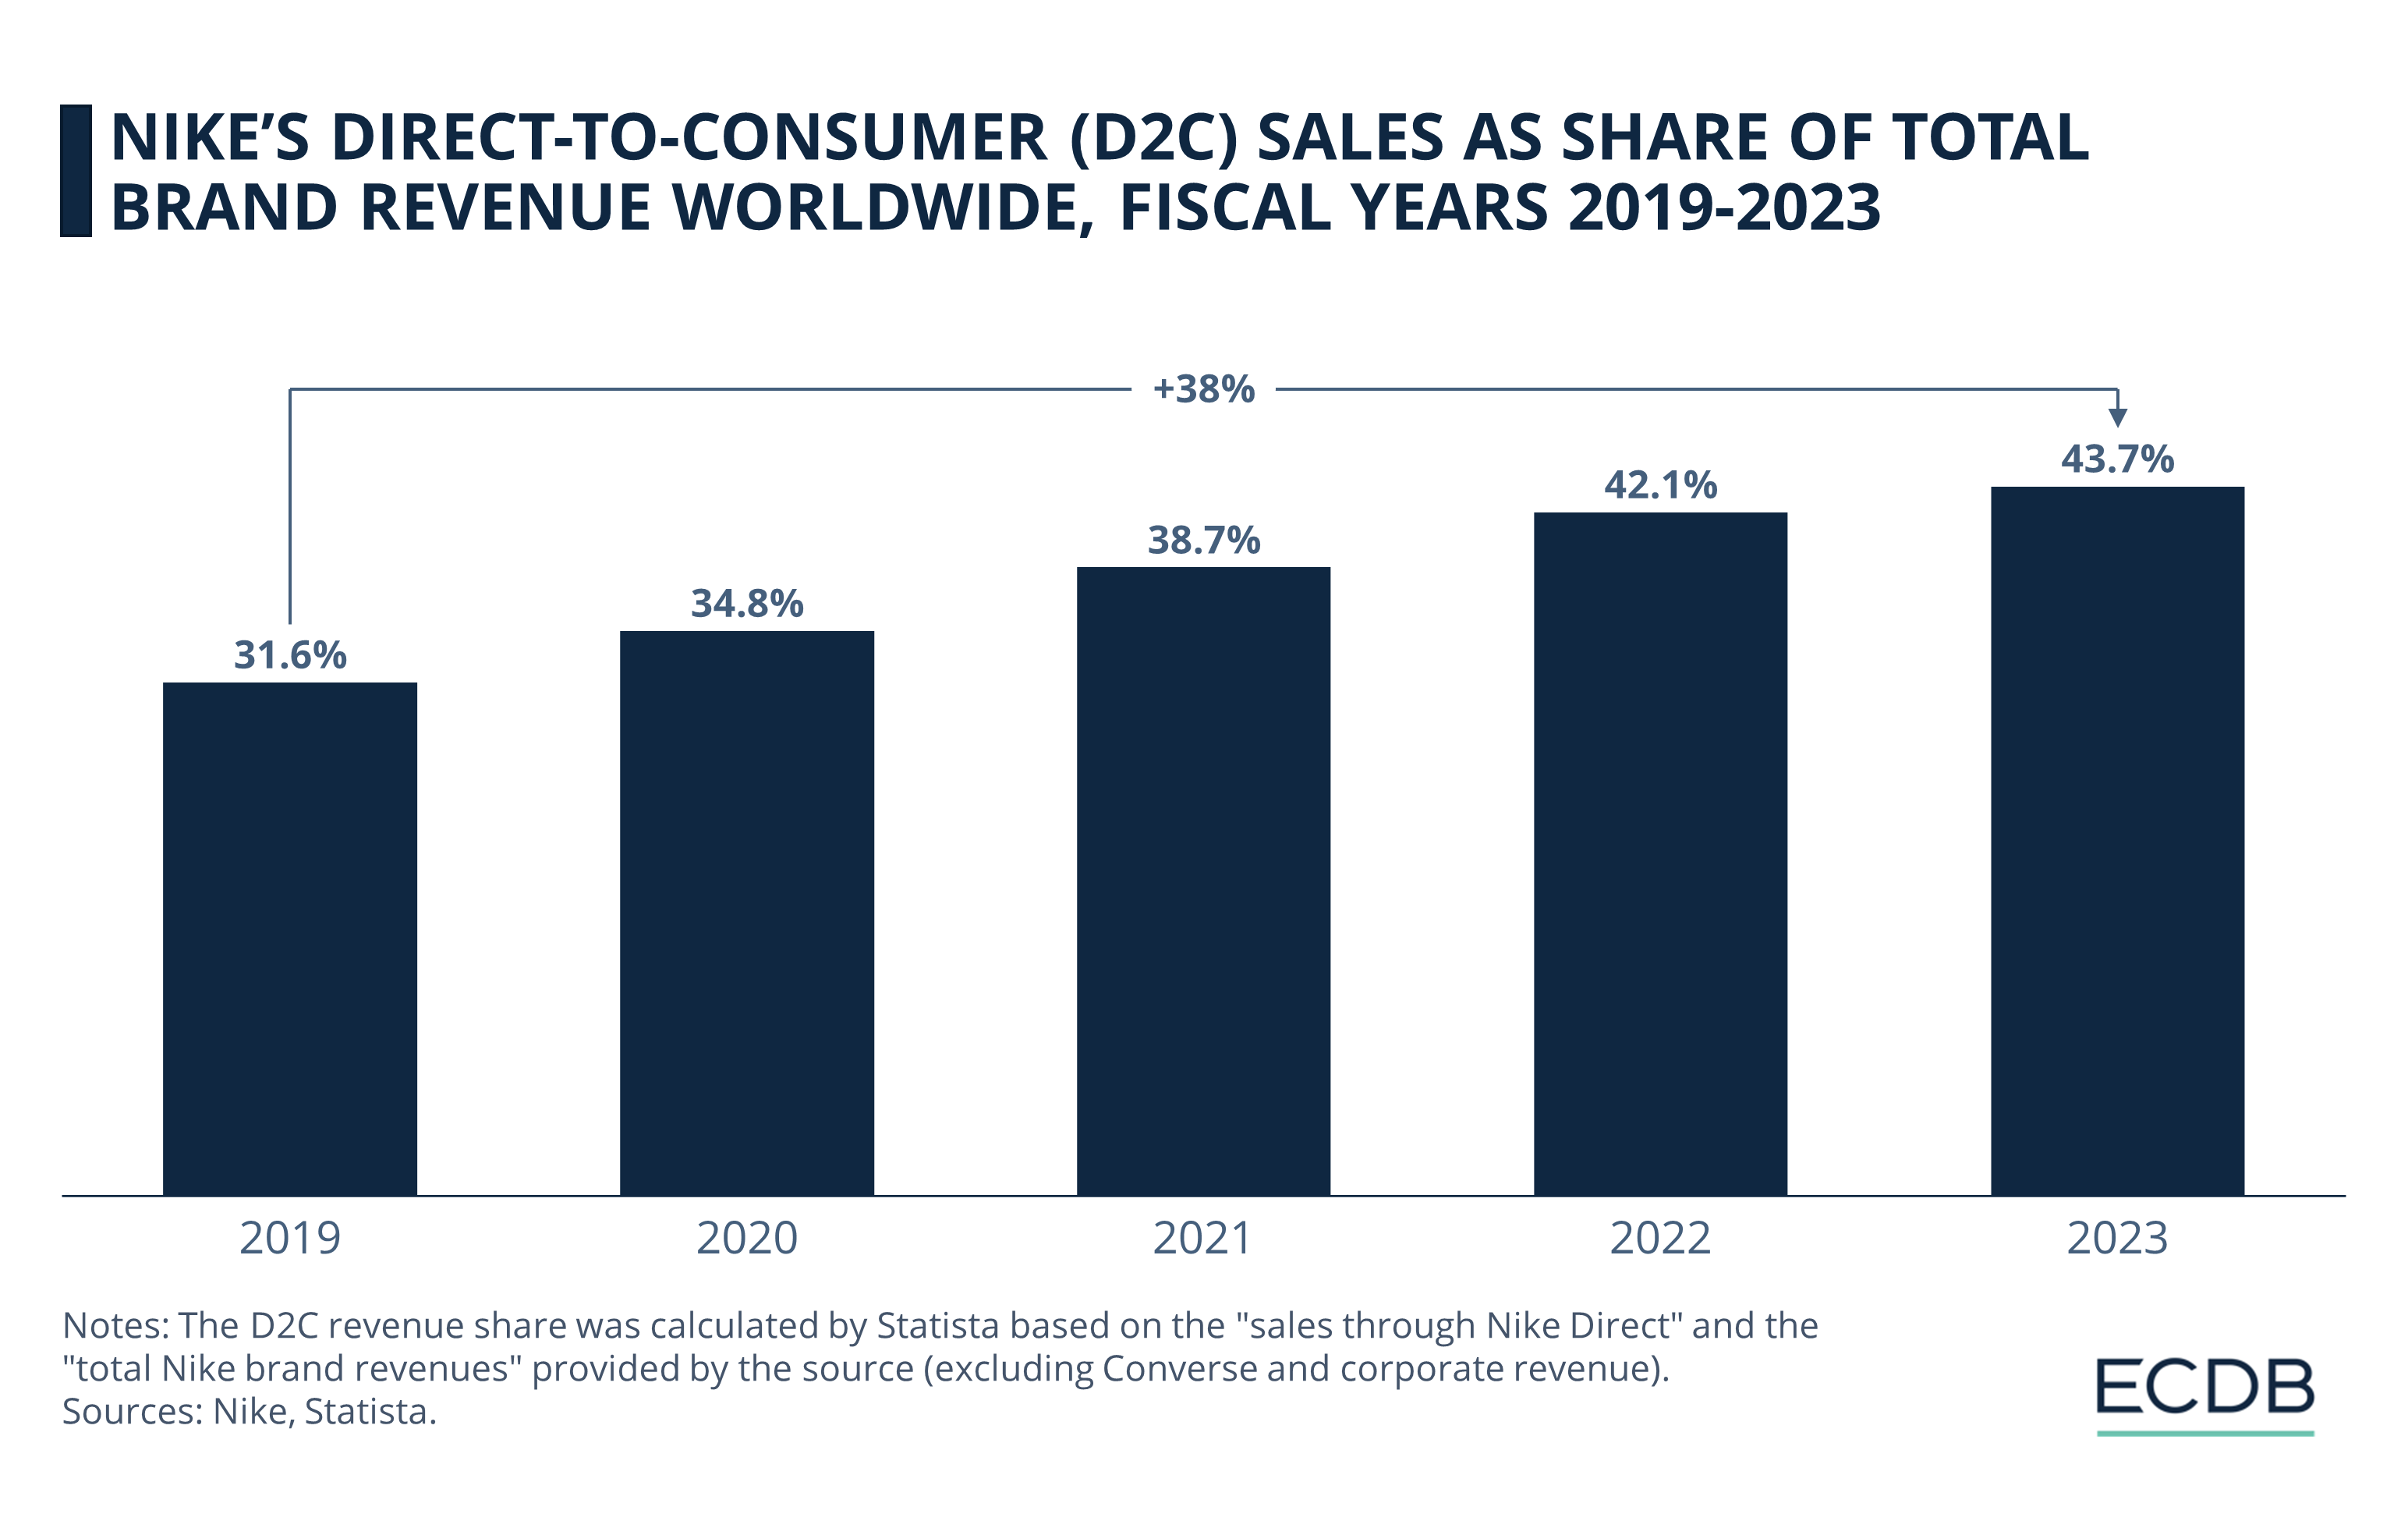 Nike’s Direct-to-Consumer (D2C) Sales As Share of Total Brand Revenue Worldwide, Fiscal Years 2019-2023